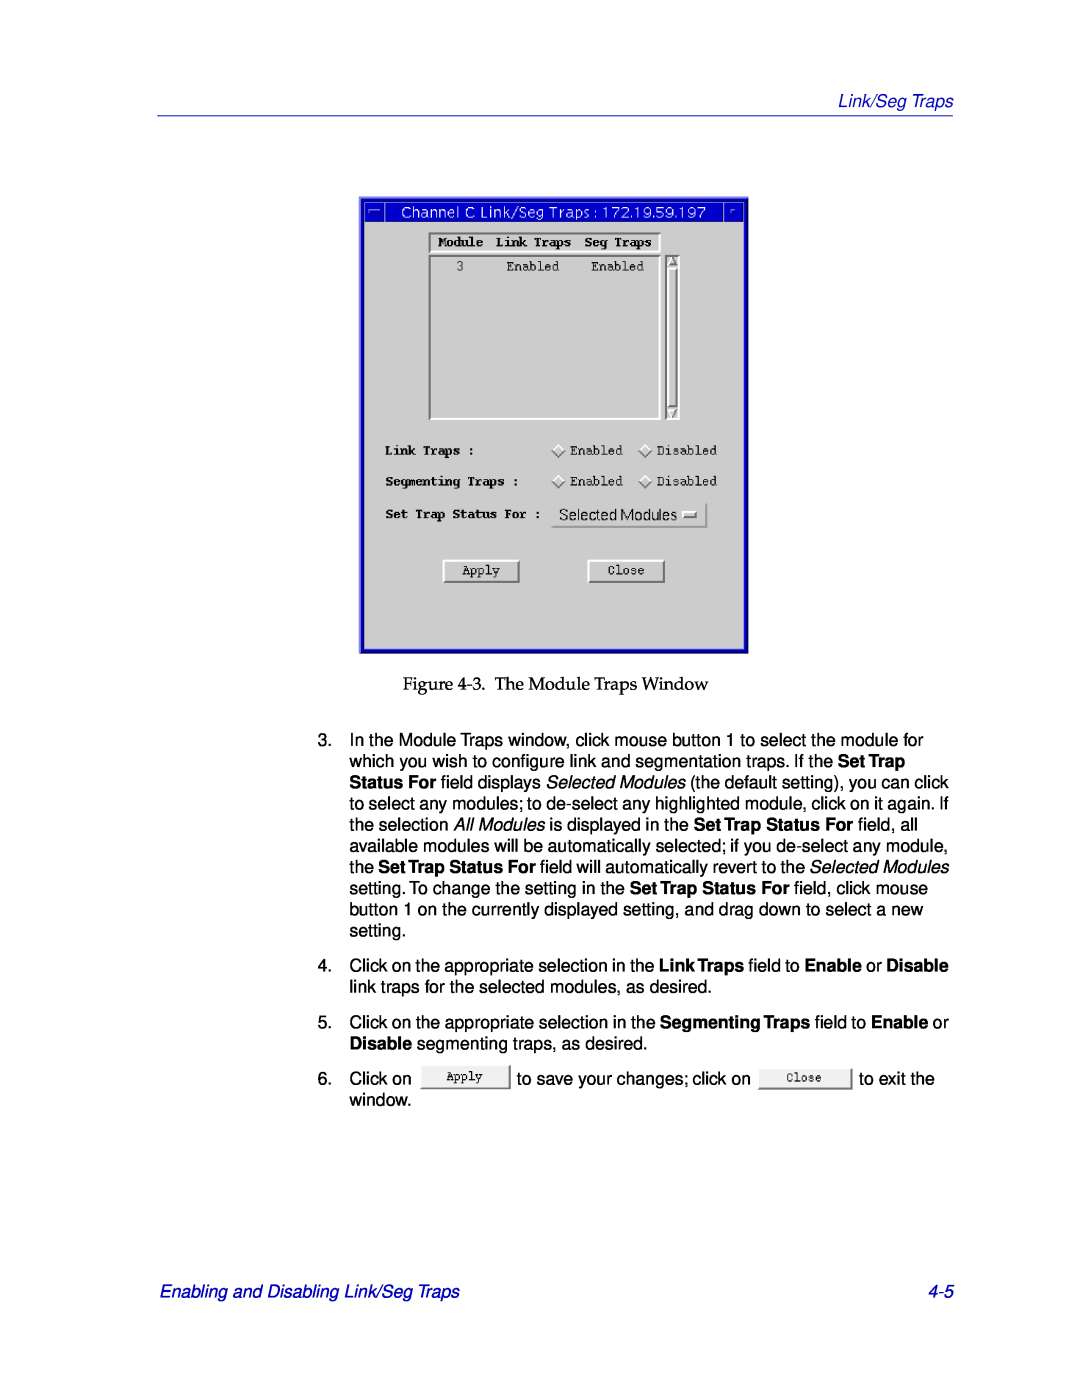 Cabletron Systems EMM-E6 manual 3. The Module Traps Window, Enabling and Disabling Link/Seg Traps 